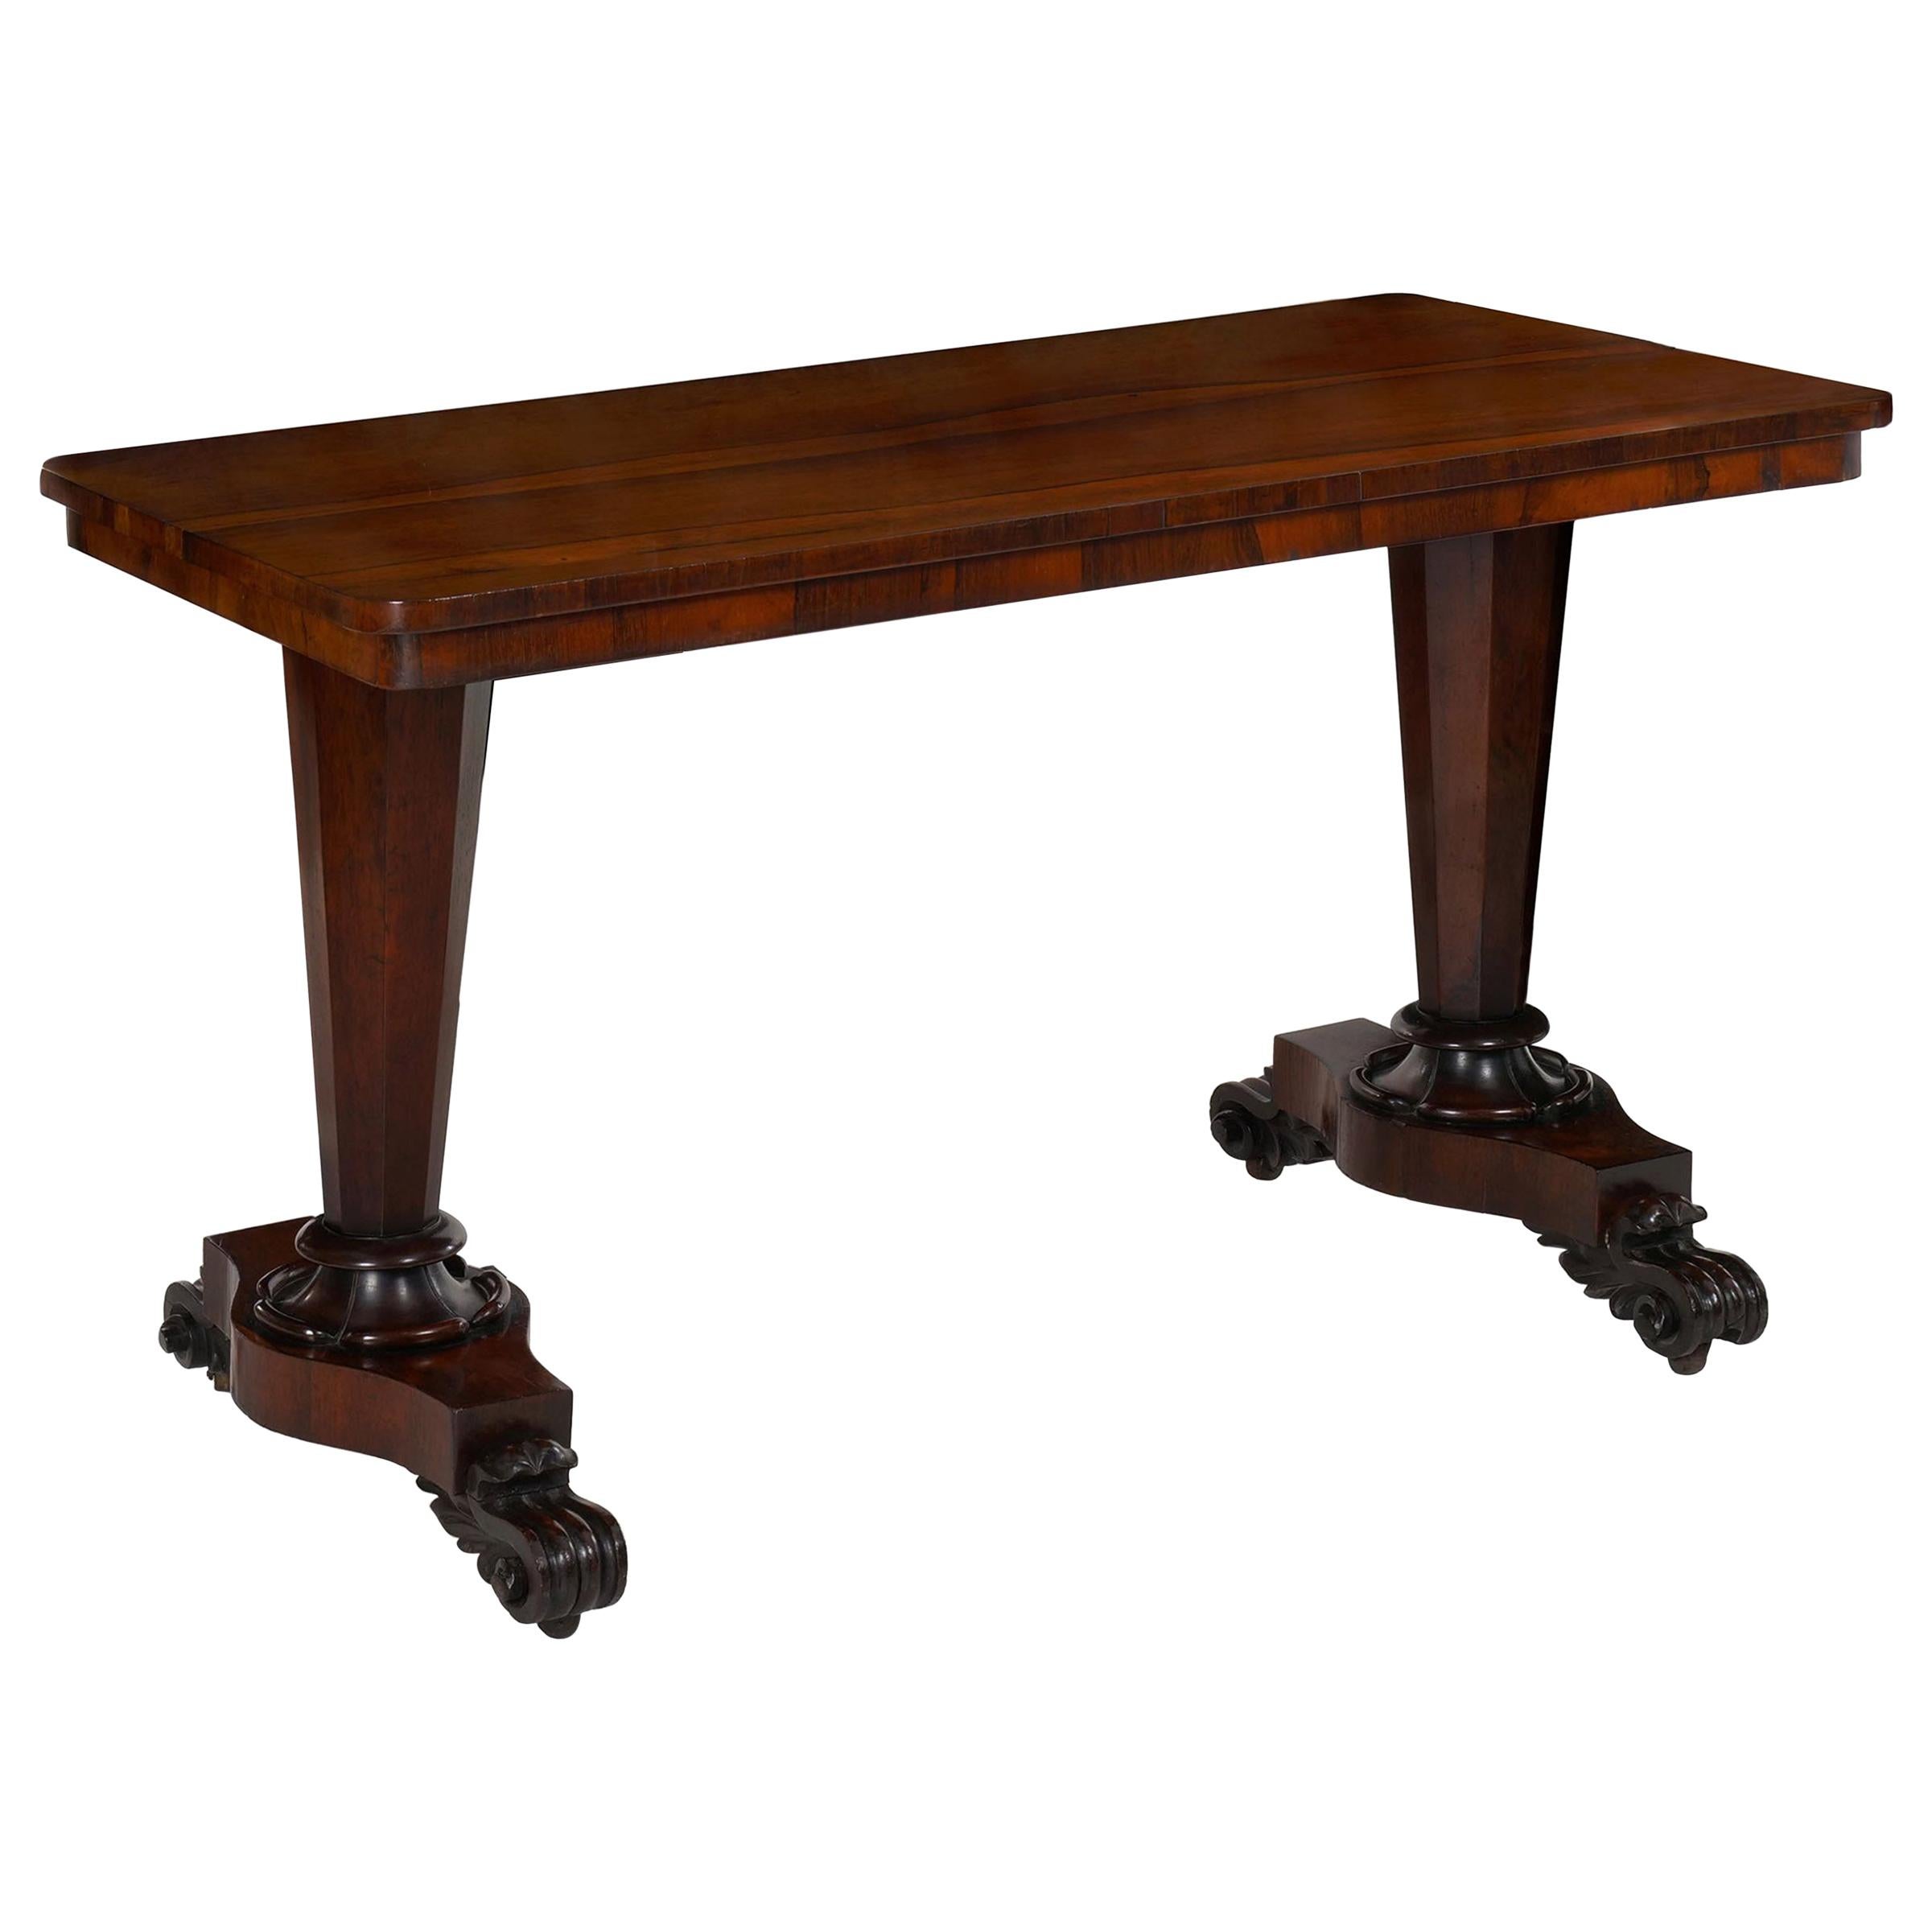 English William IV Period Rosewood Antique Writing Table Console, circa 1840